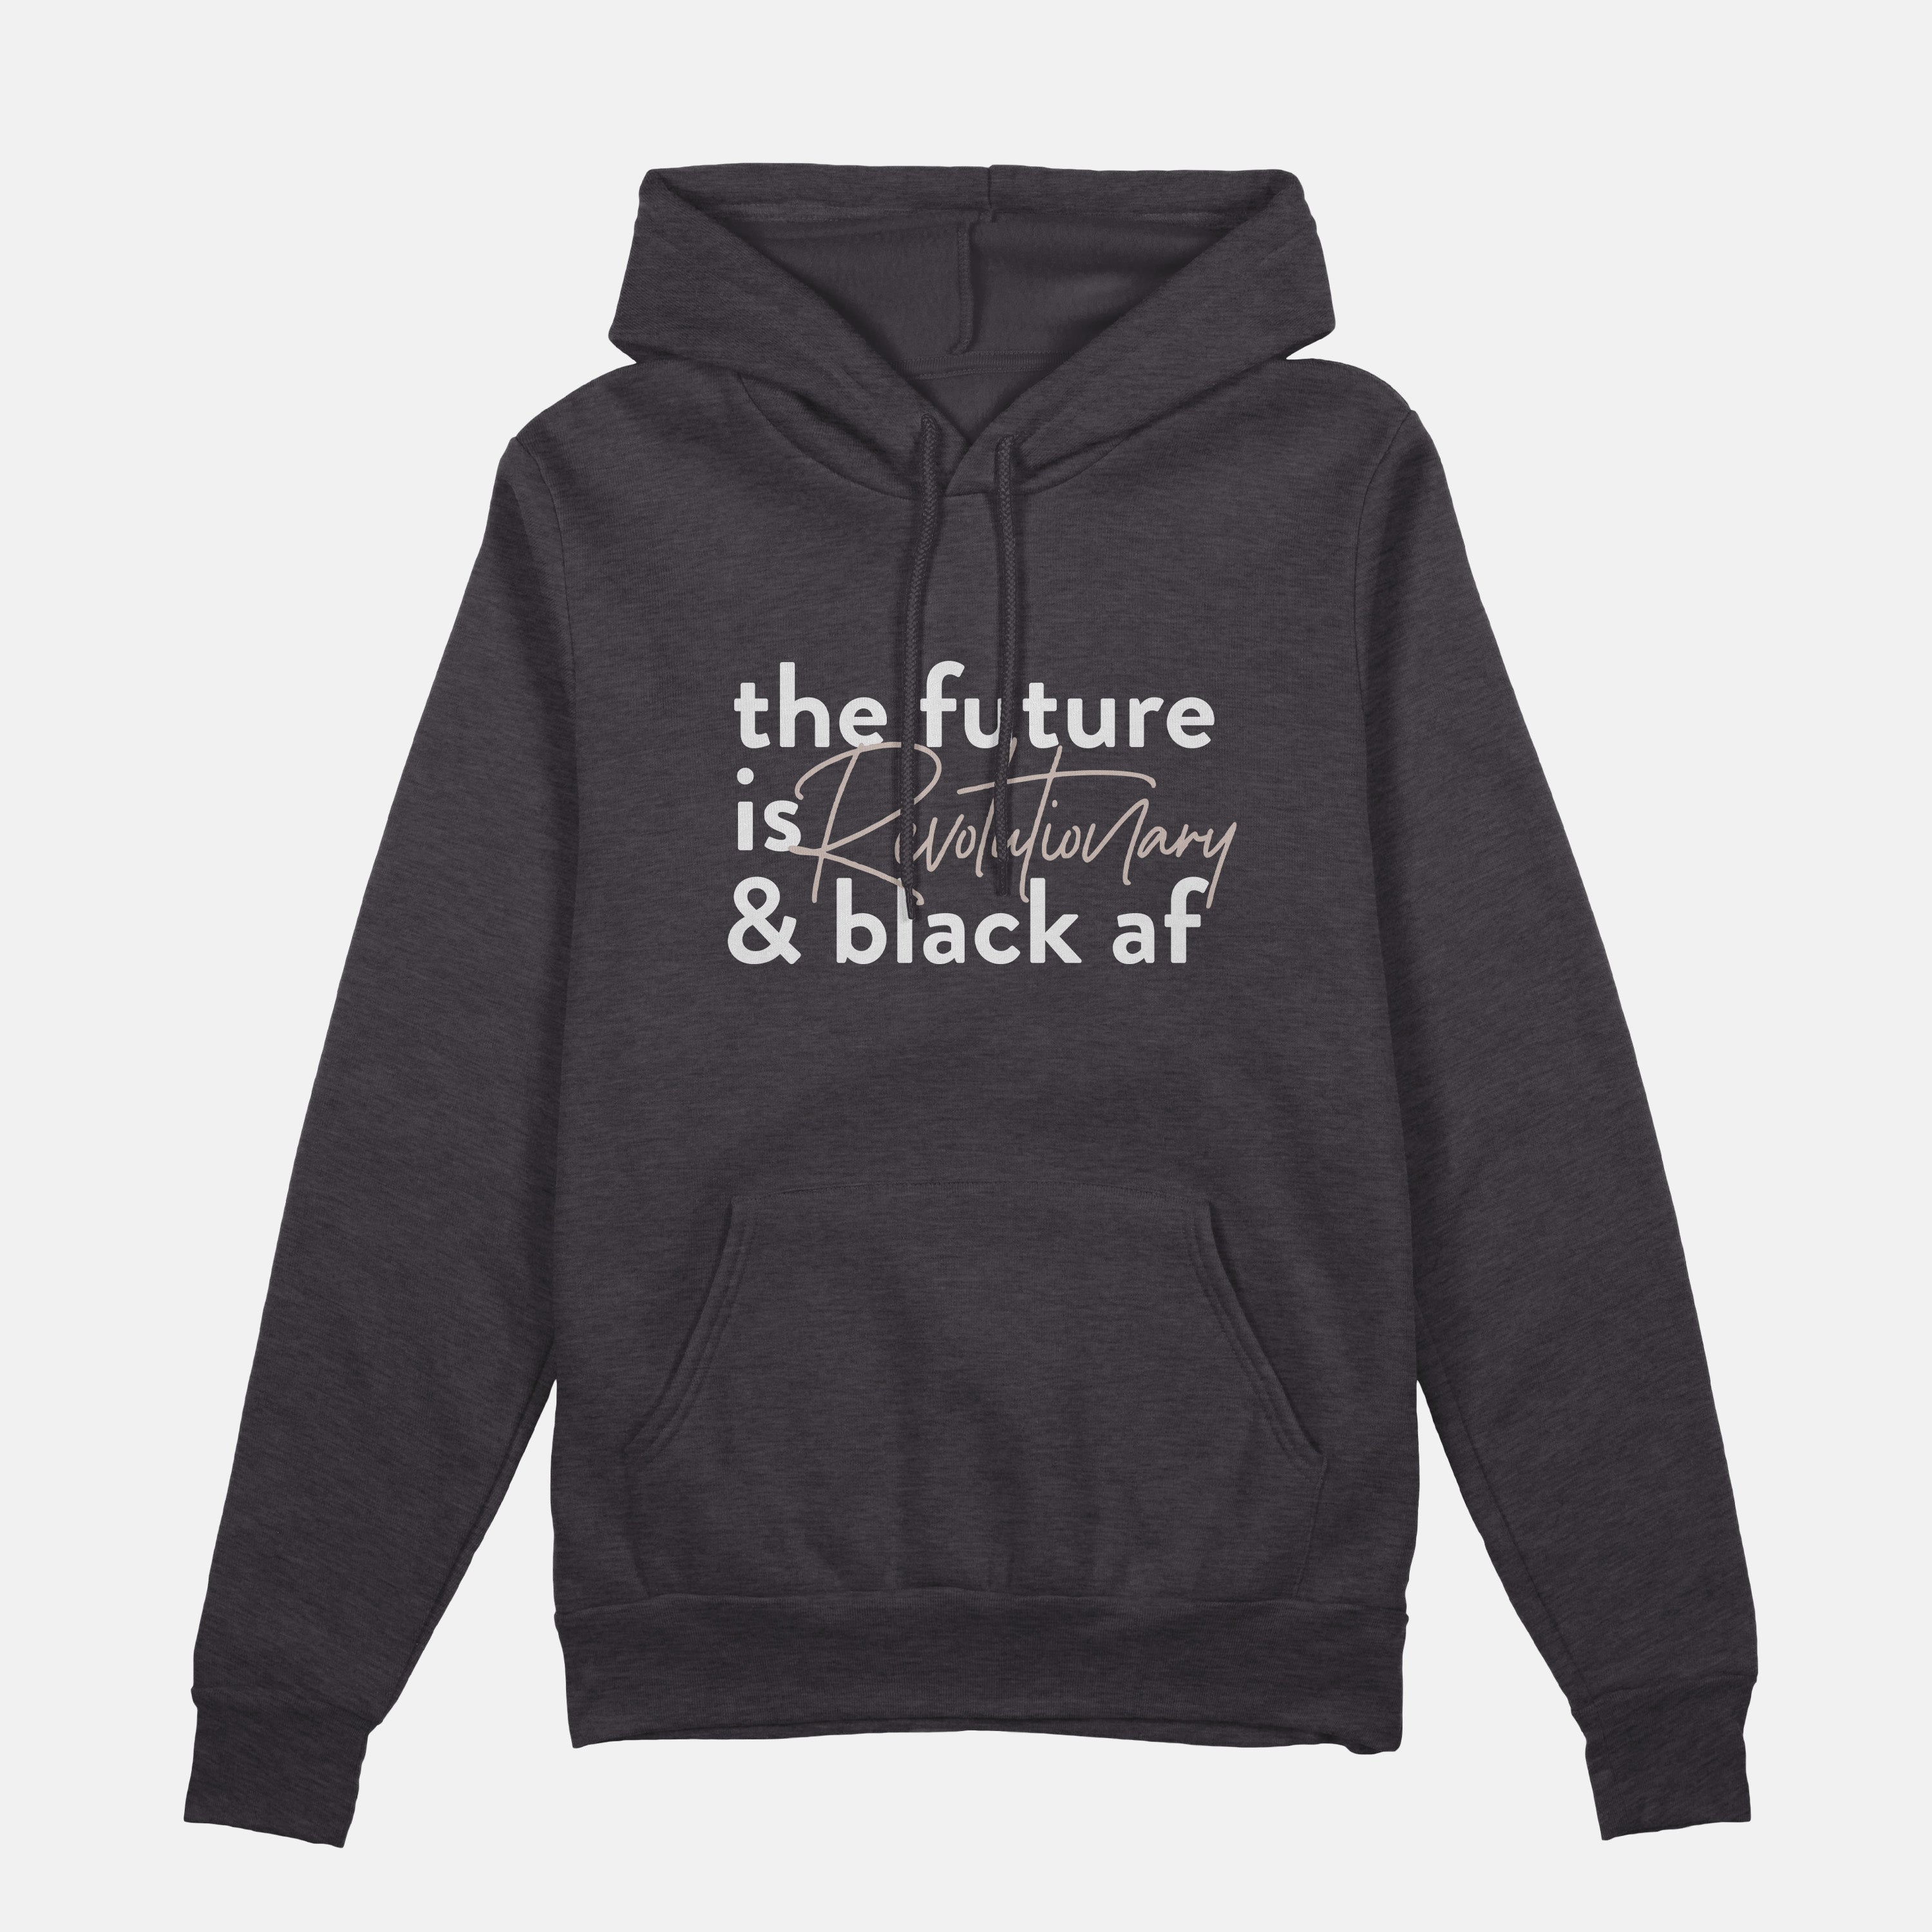 The Future Is Revolutionary And Black Af  | Hoodie